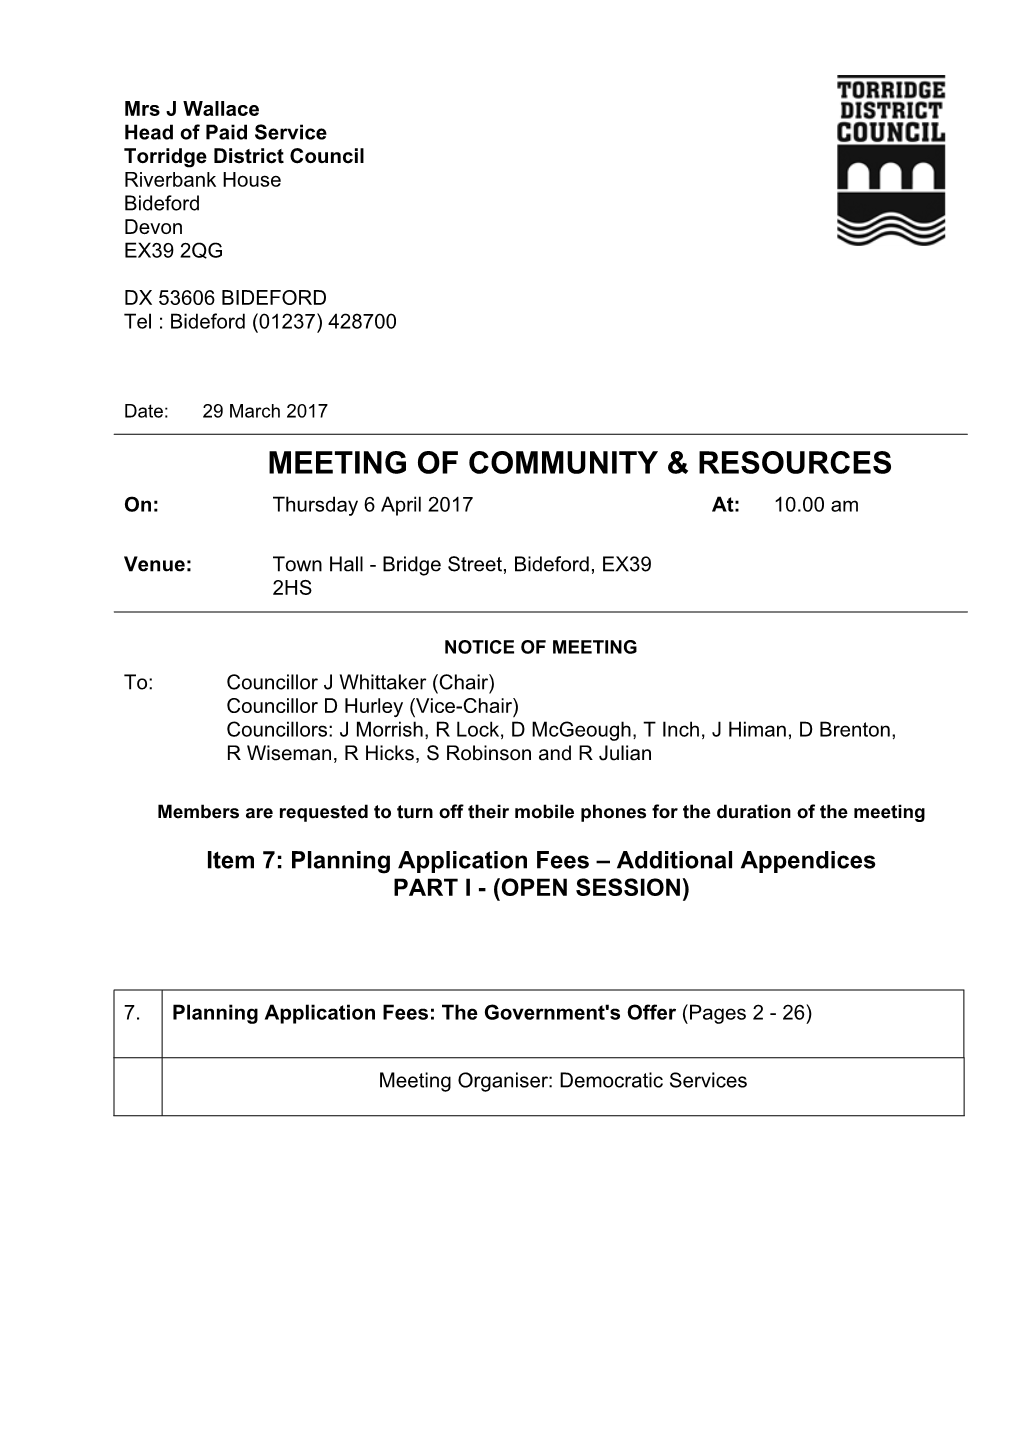 Planning Application Fees – Additional Appendices PART I - (OPEN SESSION)